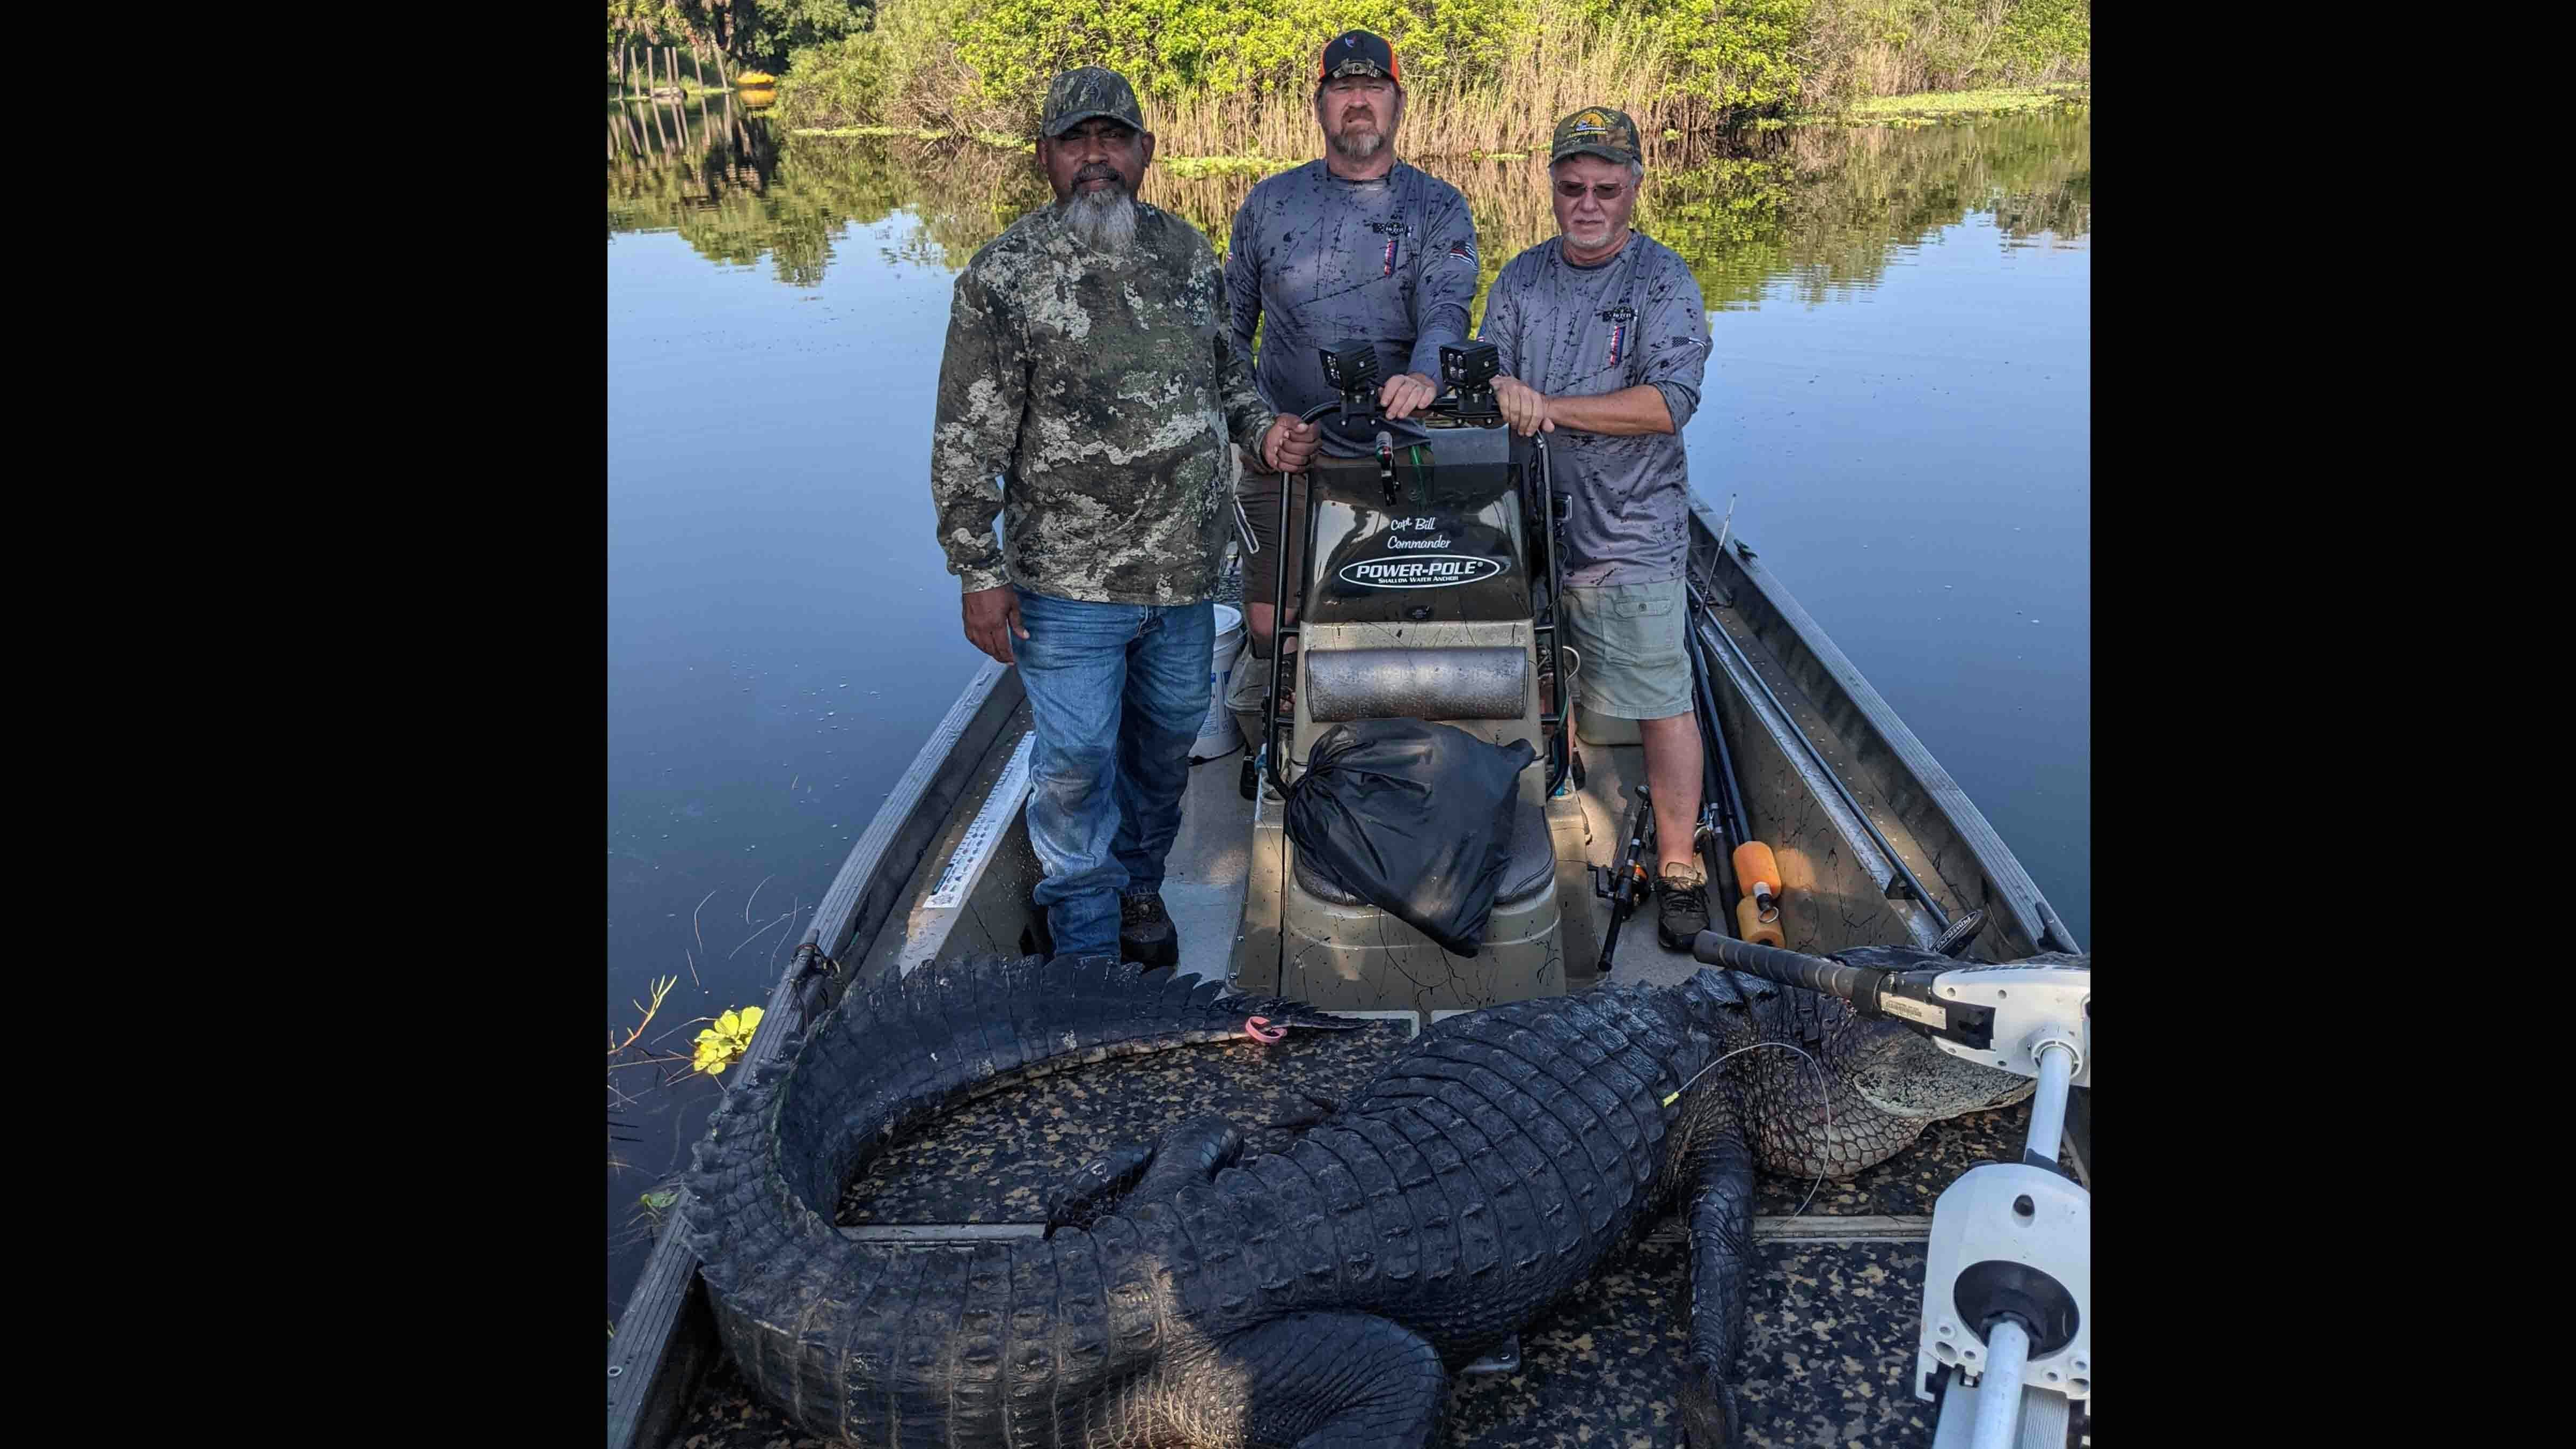 Bill Commander, center, helps mentor hunts for massive alligators in Florida. His group, 10 Can Inc. Christian Adventure Network, is hoping to trade gator hunting wisdom for Wyoming elk hunting tips.